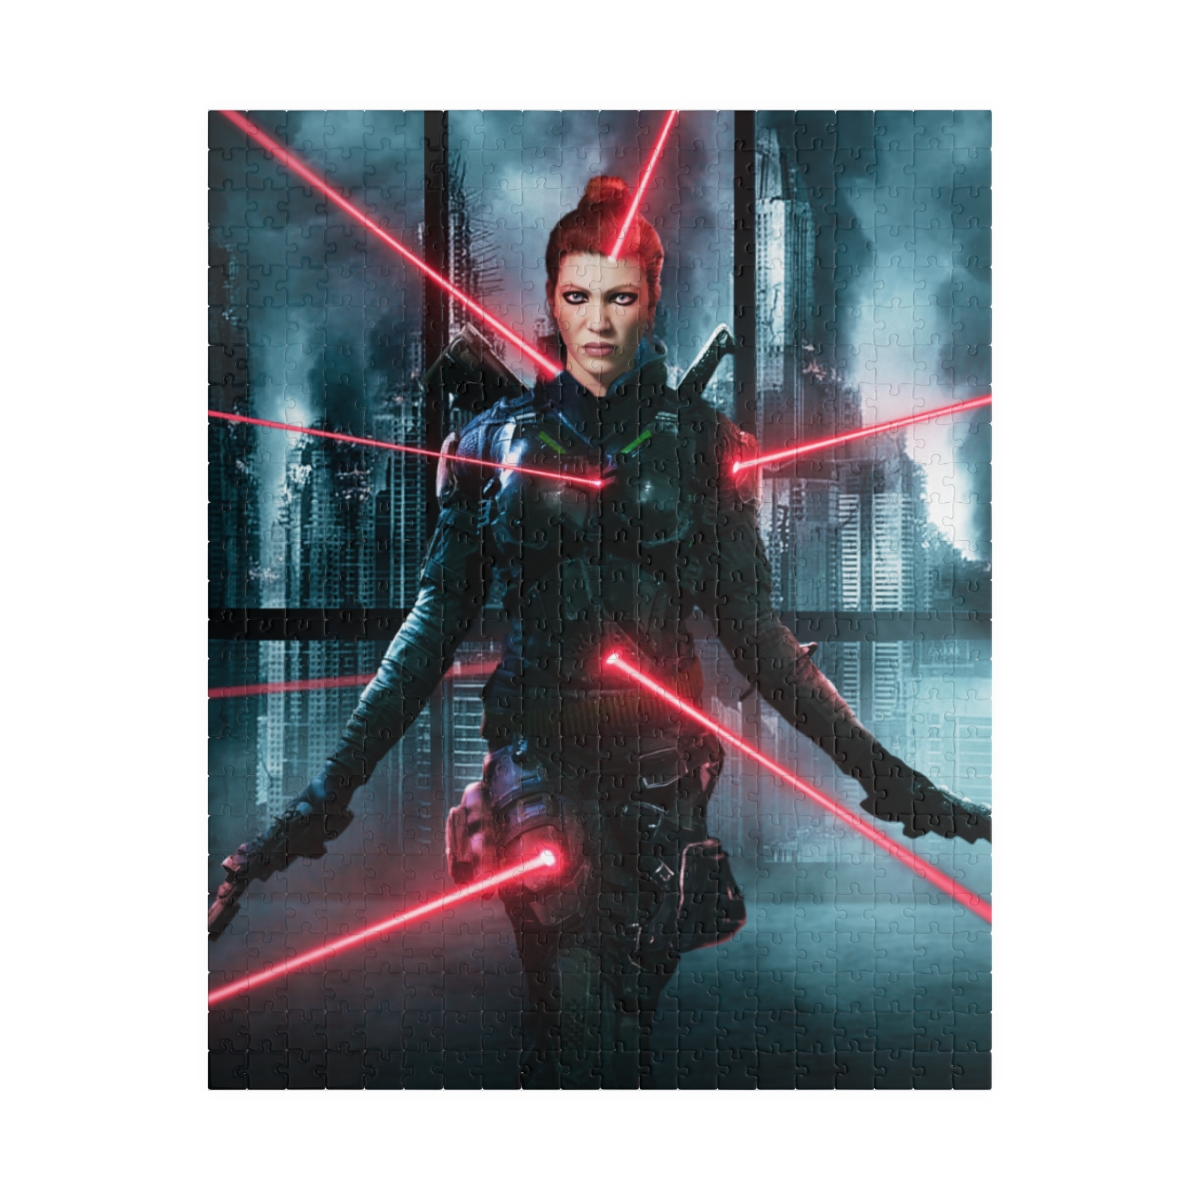 Rogue Assassin epic jumbo canvas art limited edition (32x48)